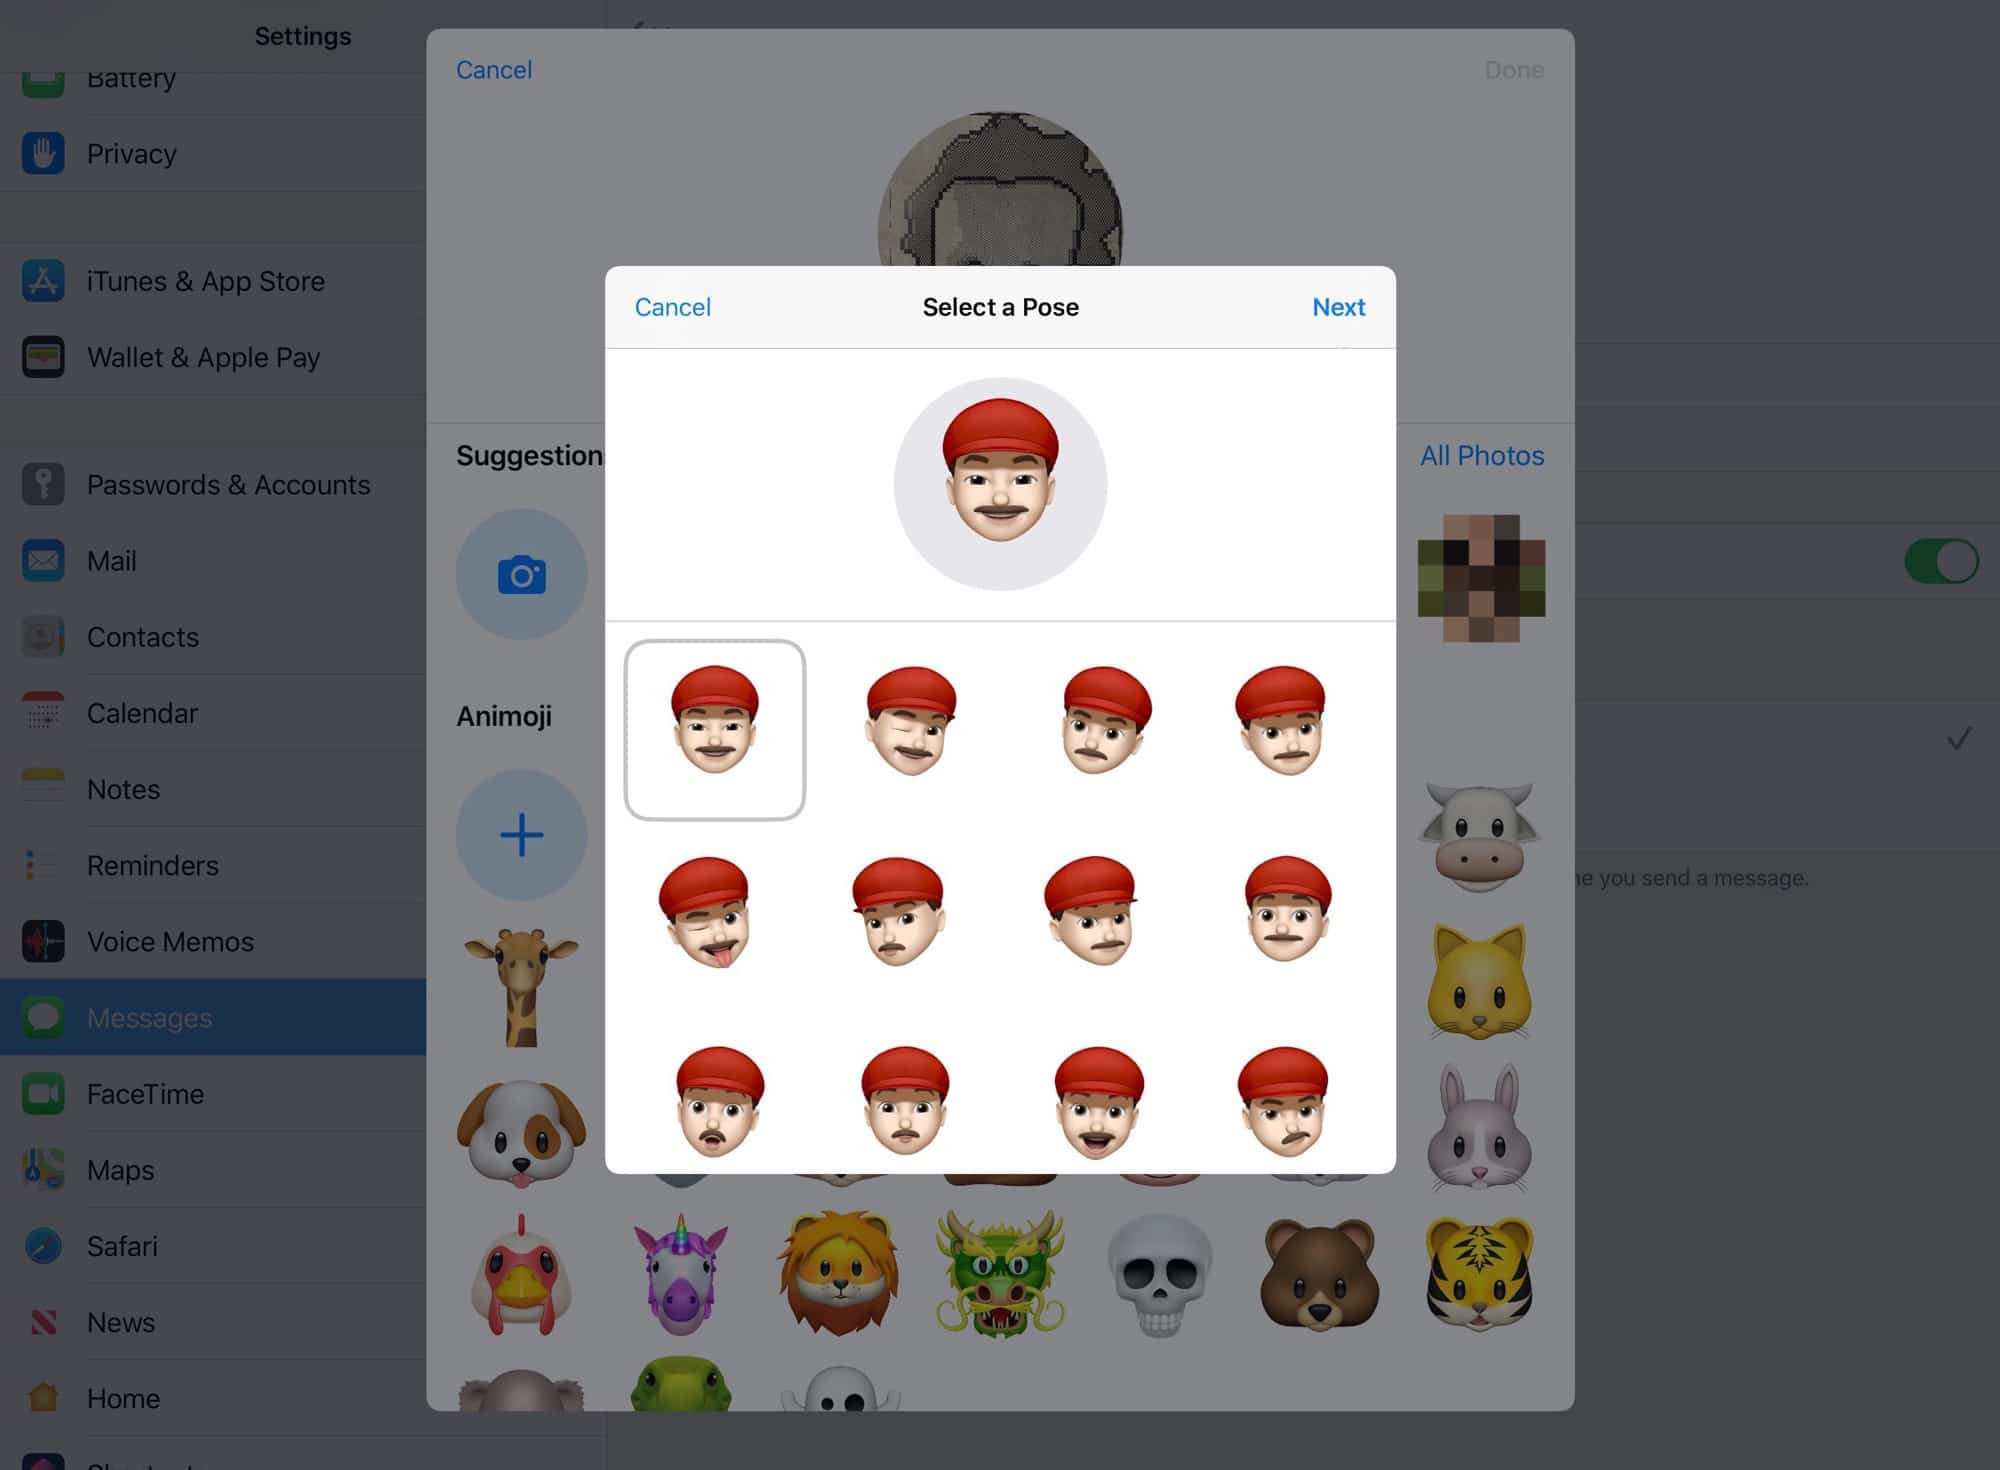 All your custom Memoji are available as stickers.